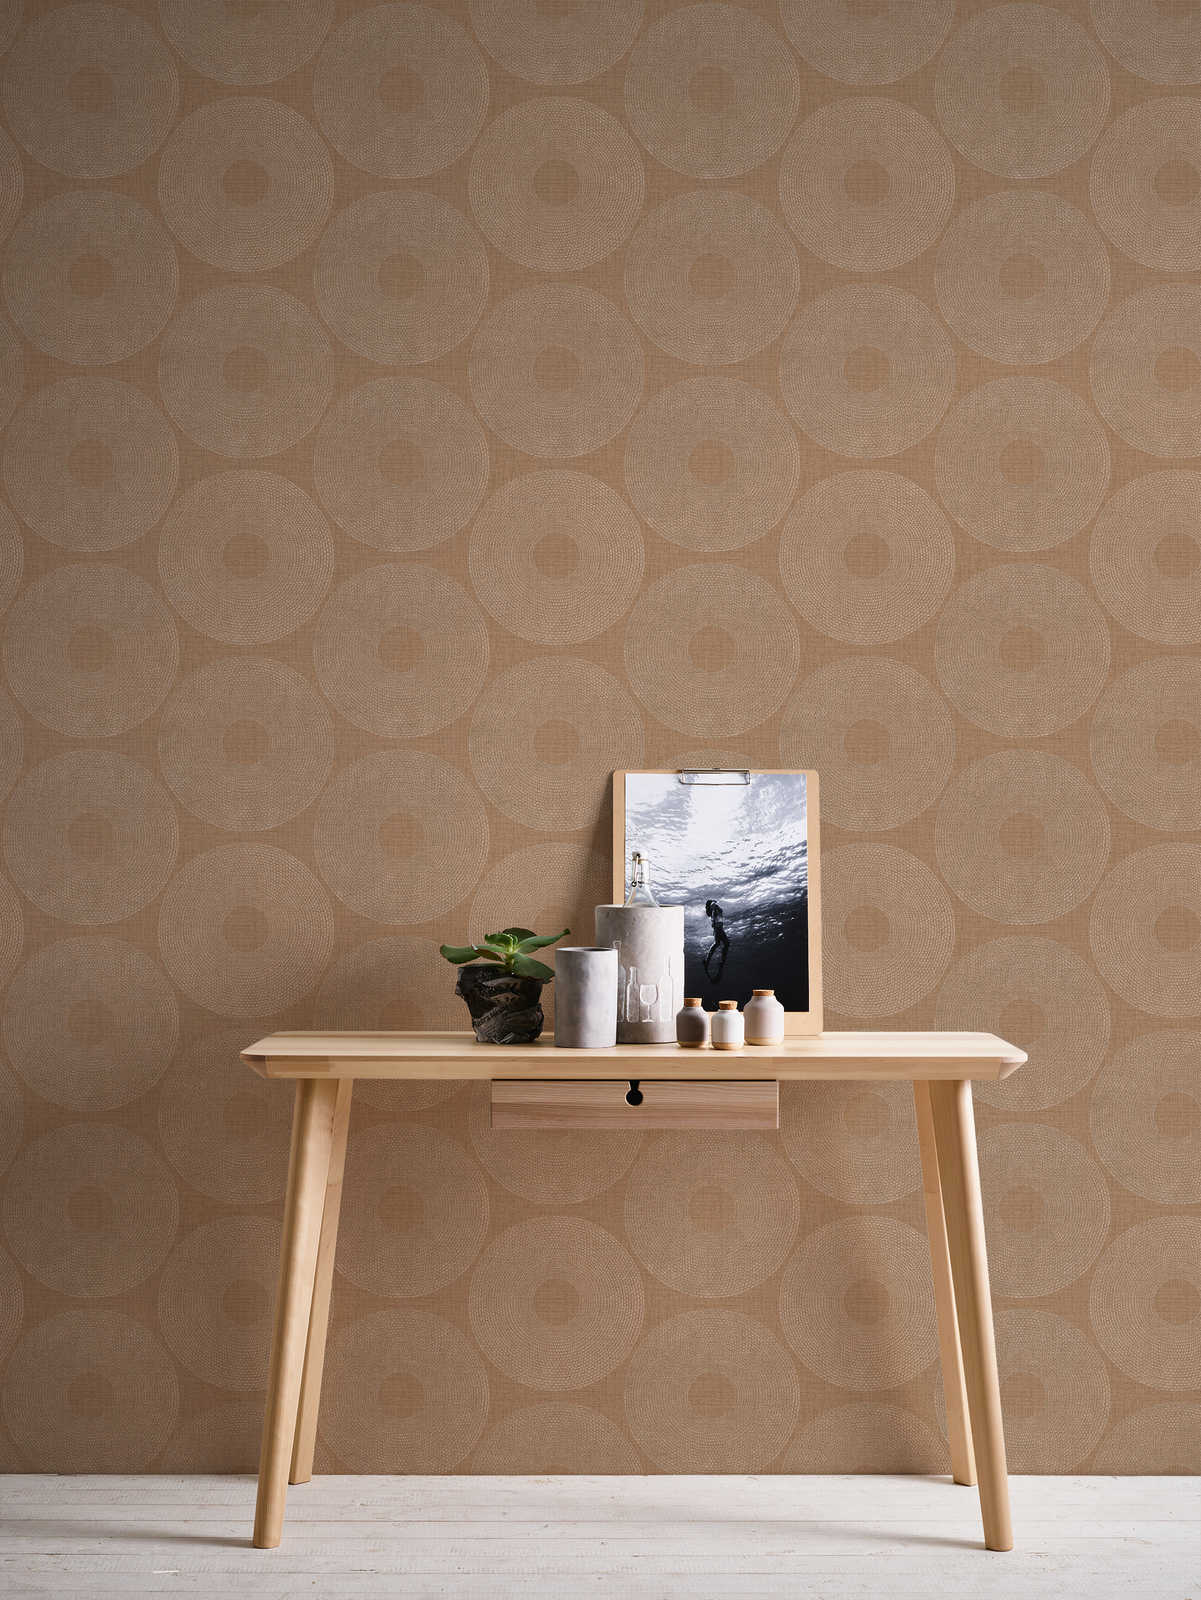             Metallic wallpaper circles with structure design - brown
        